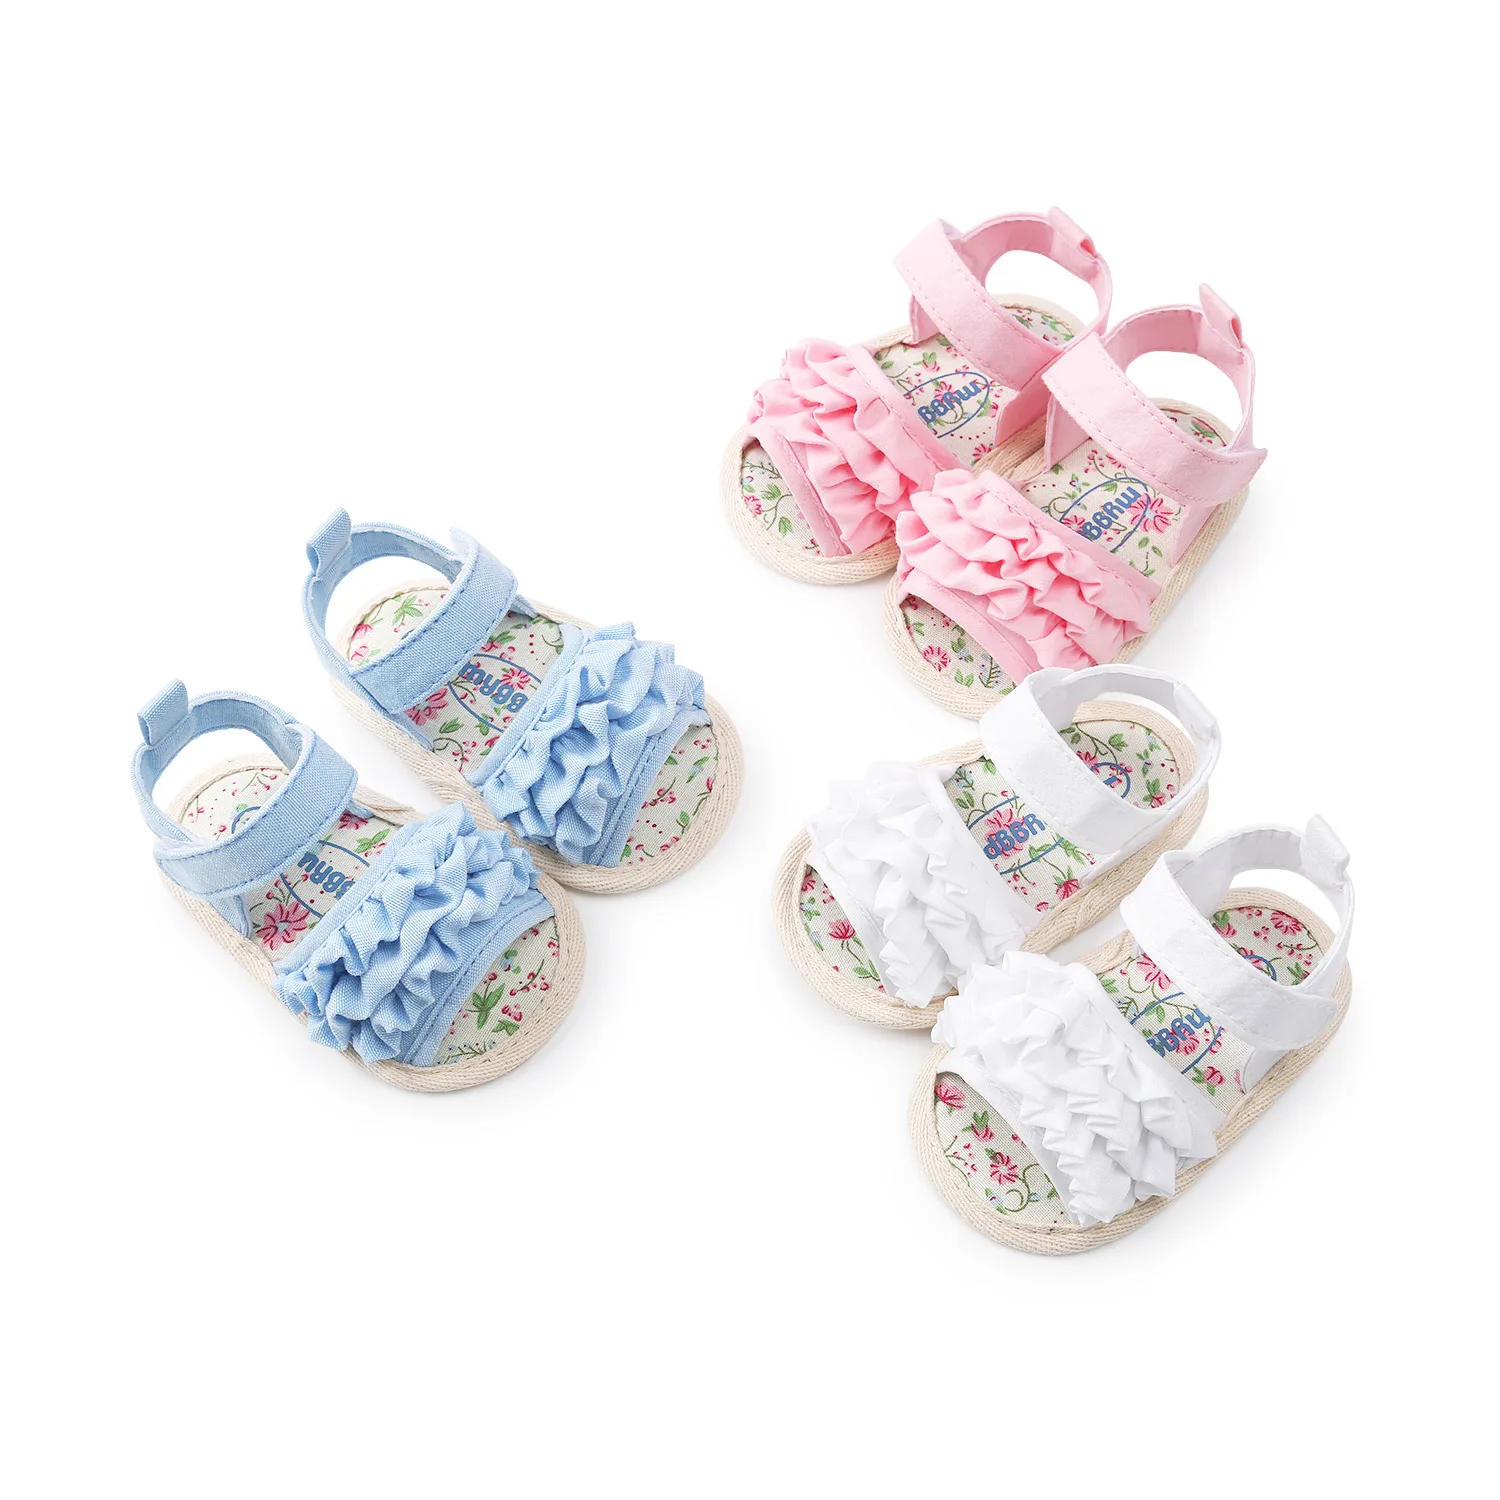 

6244 Summer Baby Girl Ruffles Flower Sandals Newborn Infant Toddlers Simple Solid Color Soft Sole Shoes Outdoor Prewalker Shoes, As picture shows